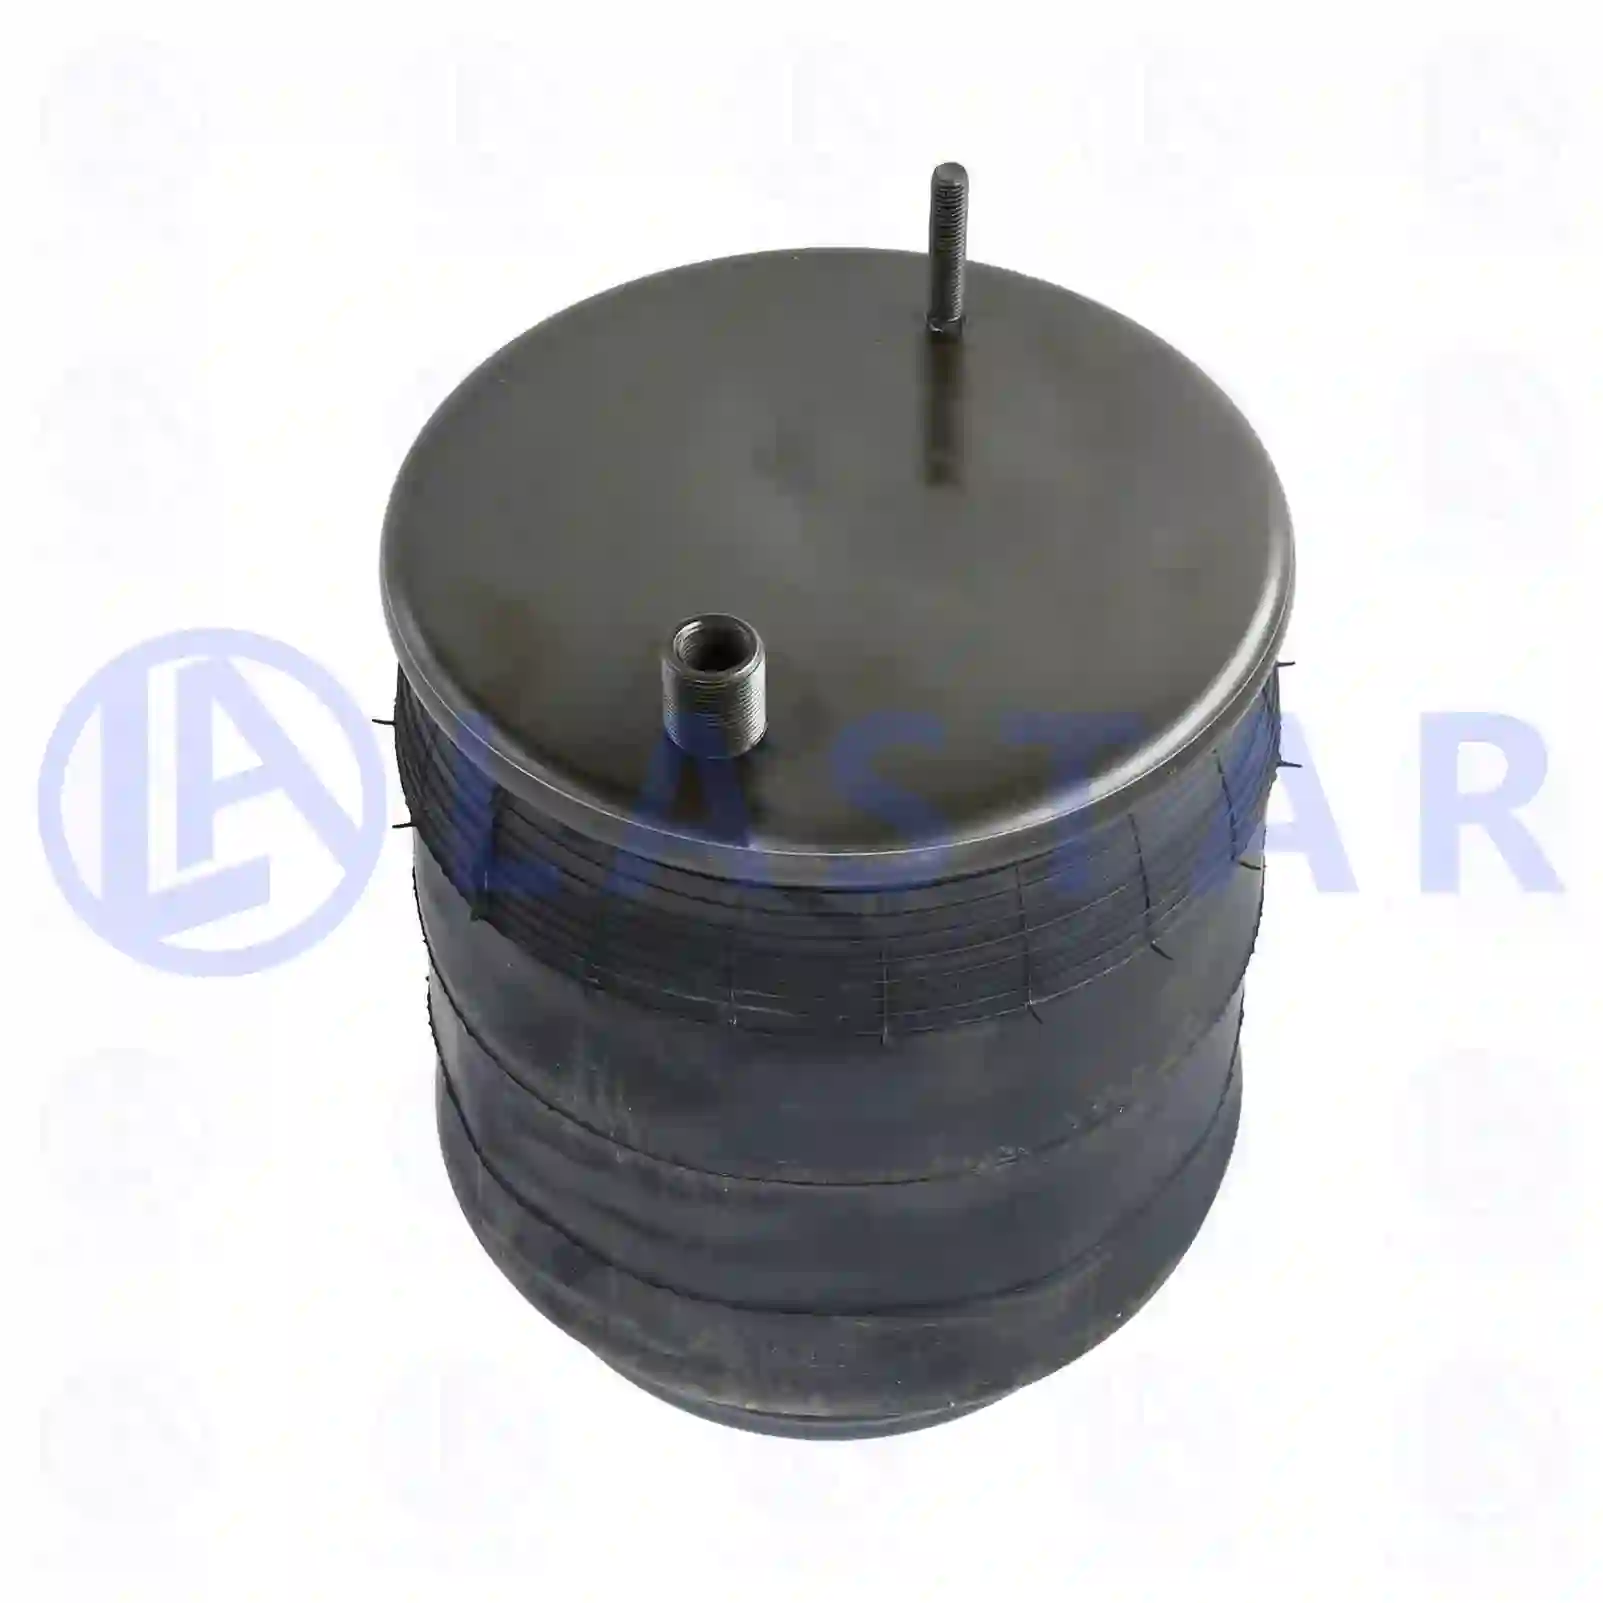 Air spring, with steel piston, 77729739, 21321520, ZG40769-0008, , , , ||  77729739 Lastar Spare Part | Truck Spare Parts, Auotomotive Spare Parts Air spring, with steel piston, 77729739, 21321520, ZG40769-0008, , , , ||  77729739 Lastar Spare Part | Truck Spare Parts, Auotomotive Spare Parts